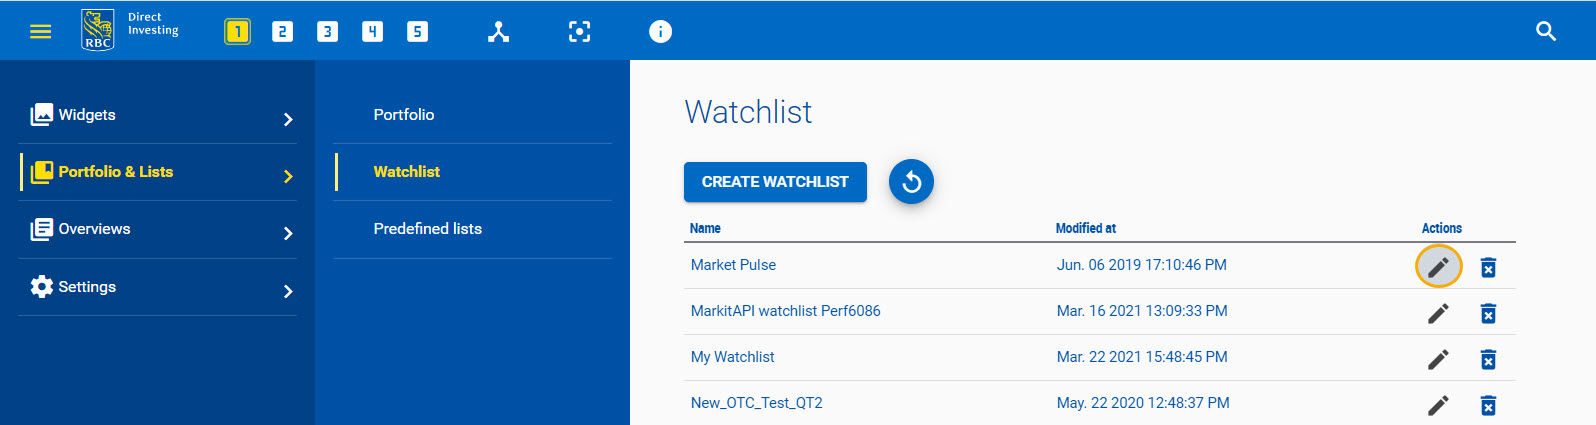 Renaming a watchlist from the Trading Dashboard's main menu. 